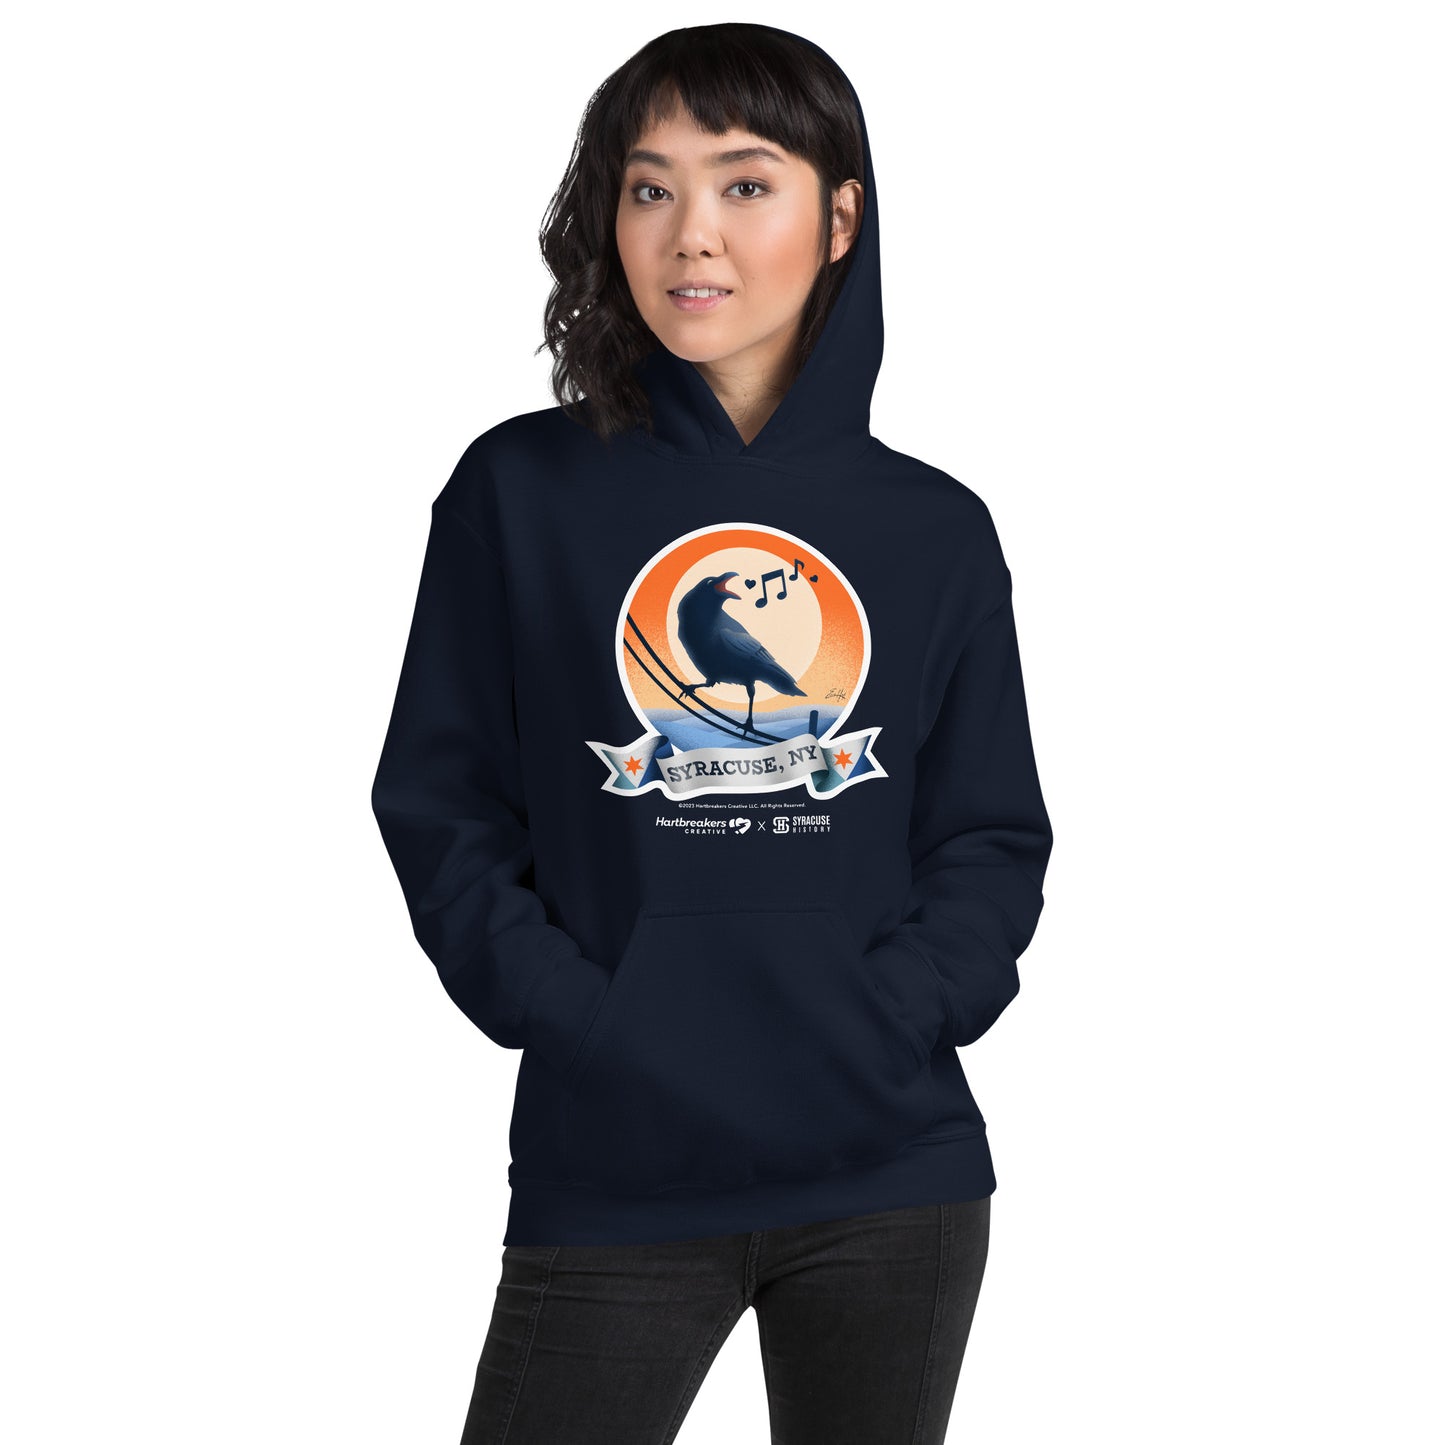 A woman wearing a navy hoodie featuring an illustration of a crow on a telephone wire and a banner beneath it that says Syracuse, NY